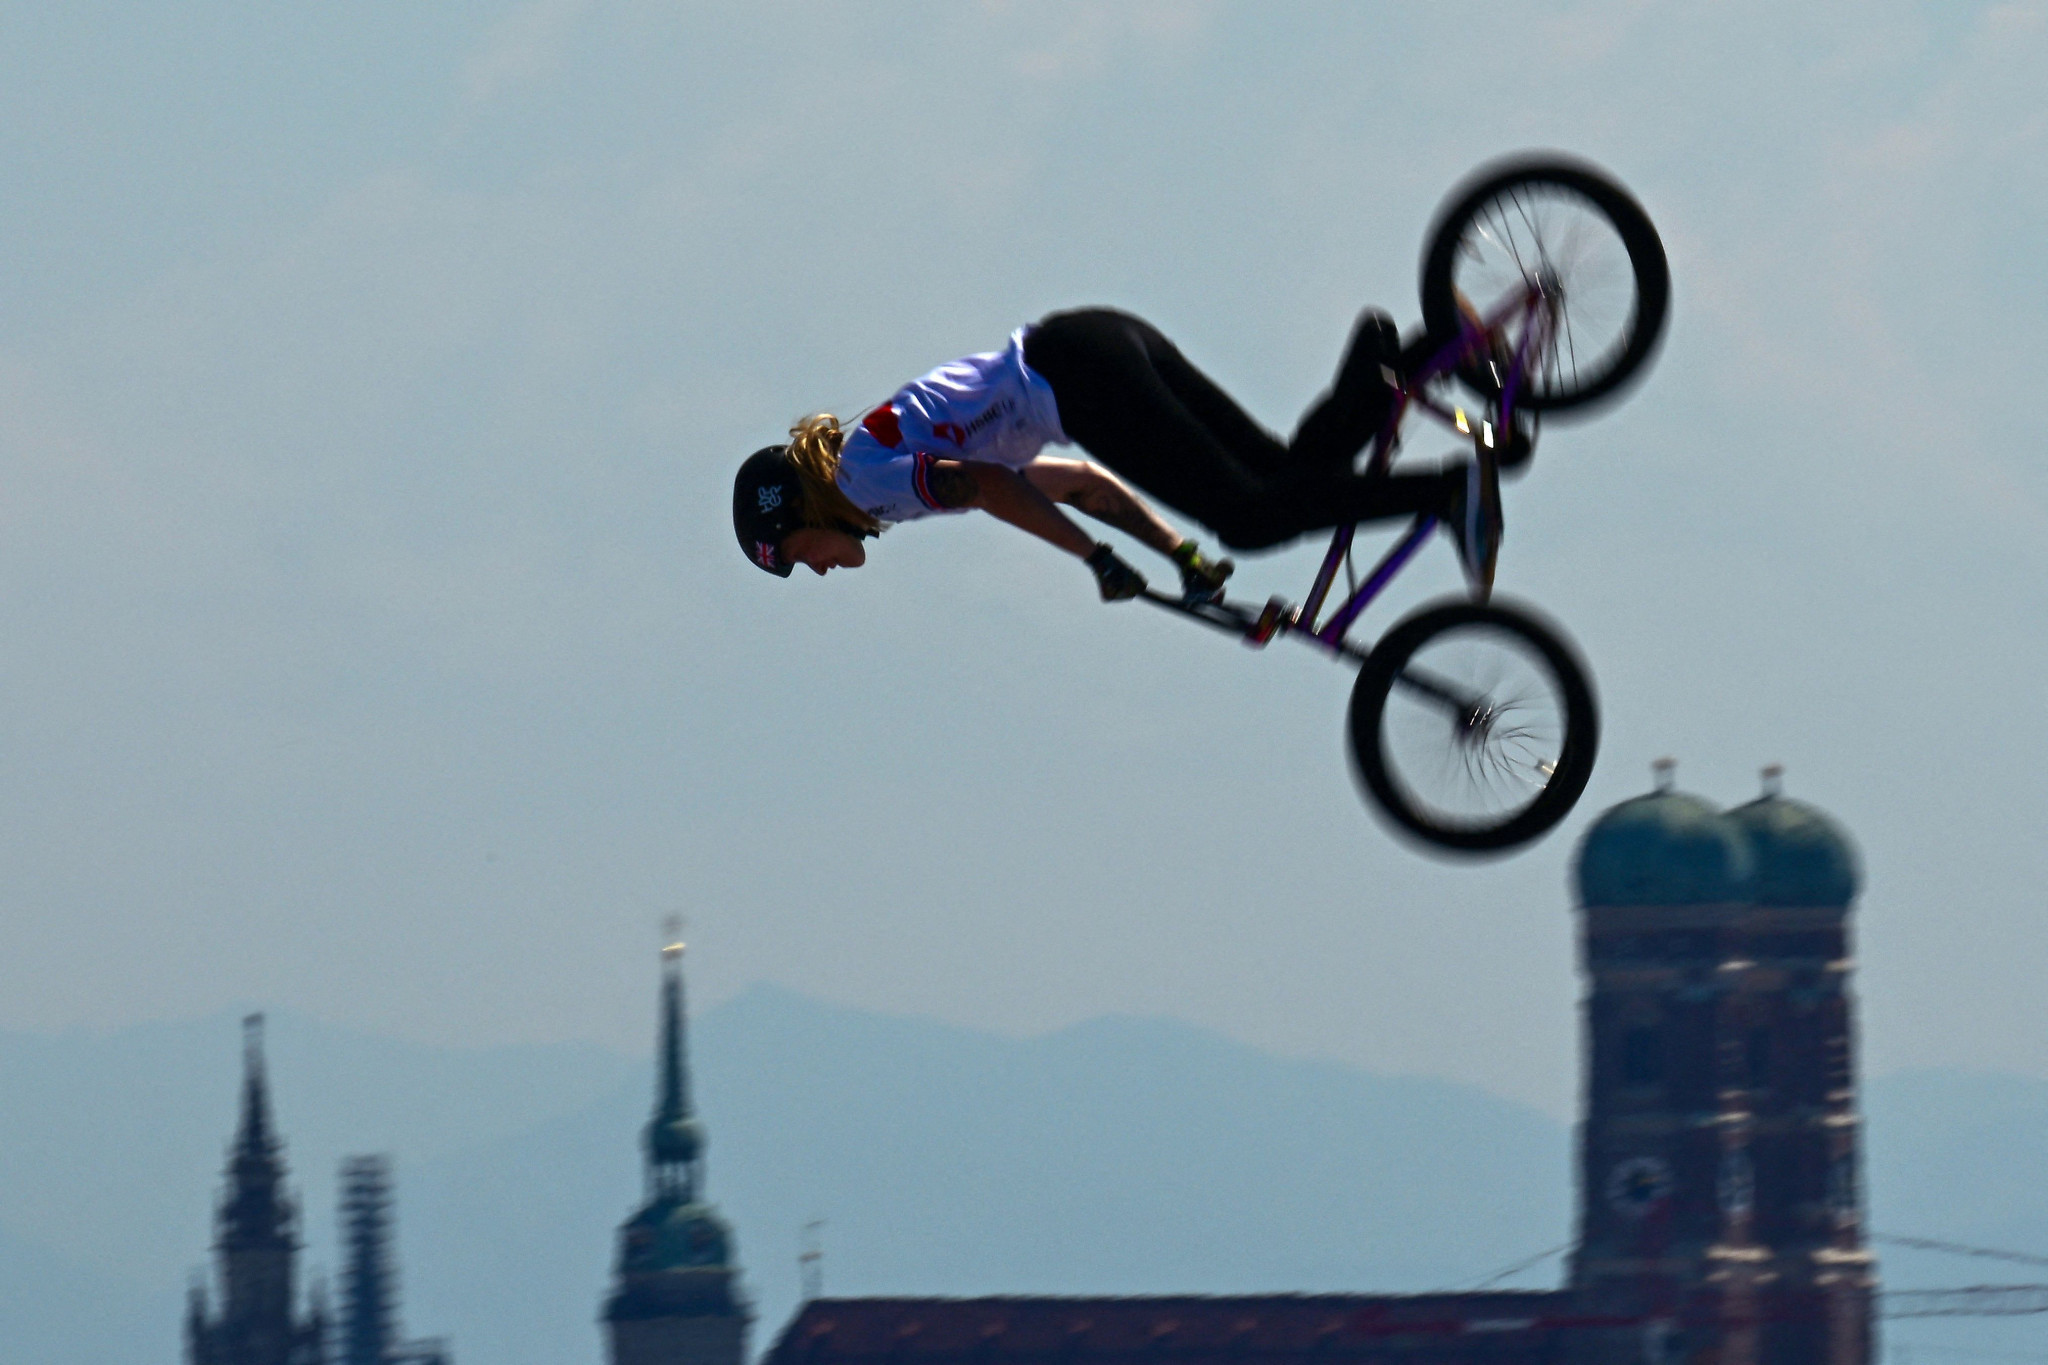 Tokyo 2020 gold medallist Charlotte Worthington topped the women's freestyle BMX qualification in Munich ©Getty Images